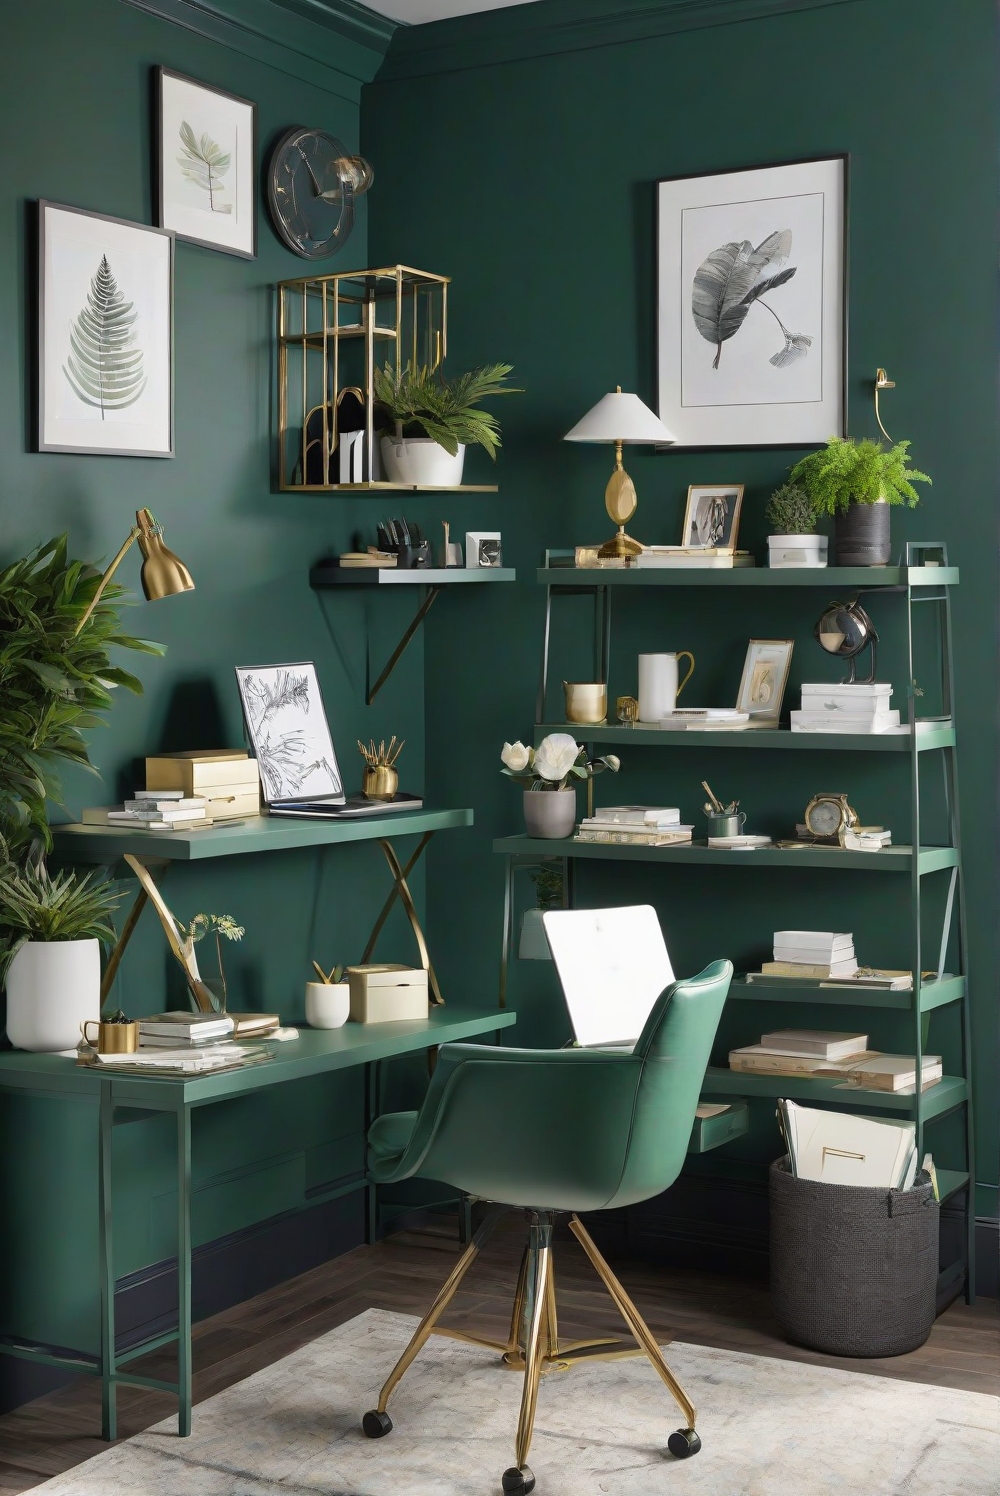 Newburg Green, Enchanted Forest, Best Wall Paint Color, Nature-inspired Tranquility, Home Decorating, Home Interior Design, Interior Bedroom Design